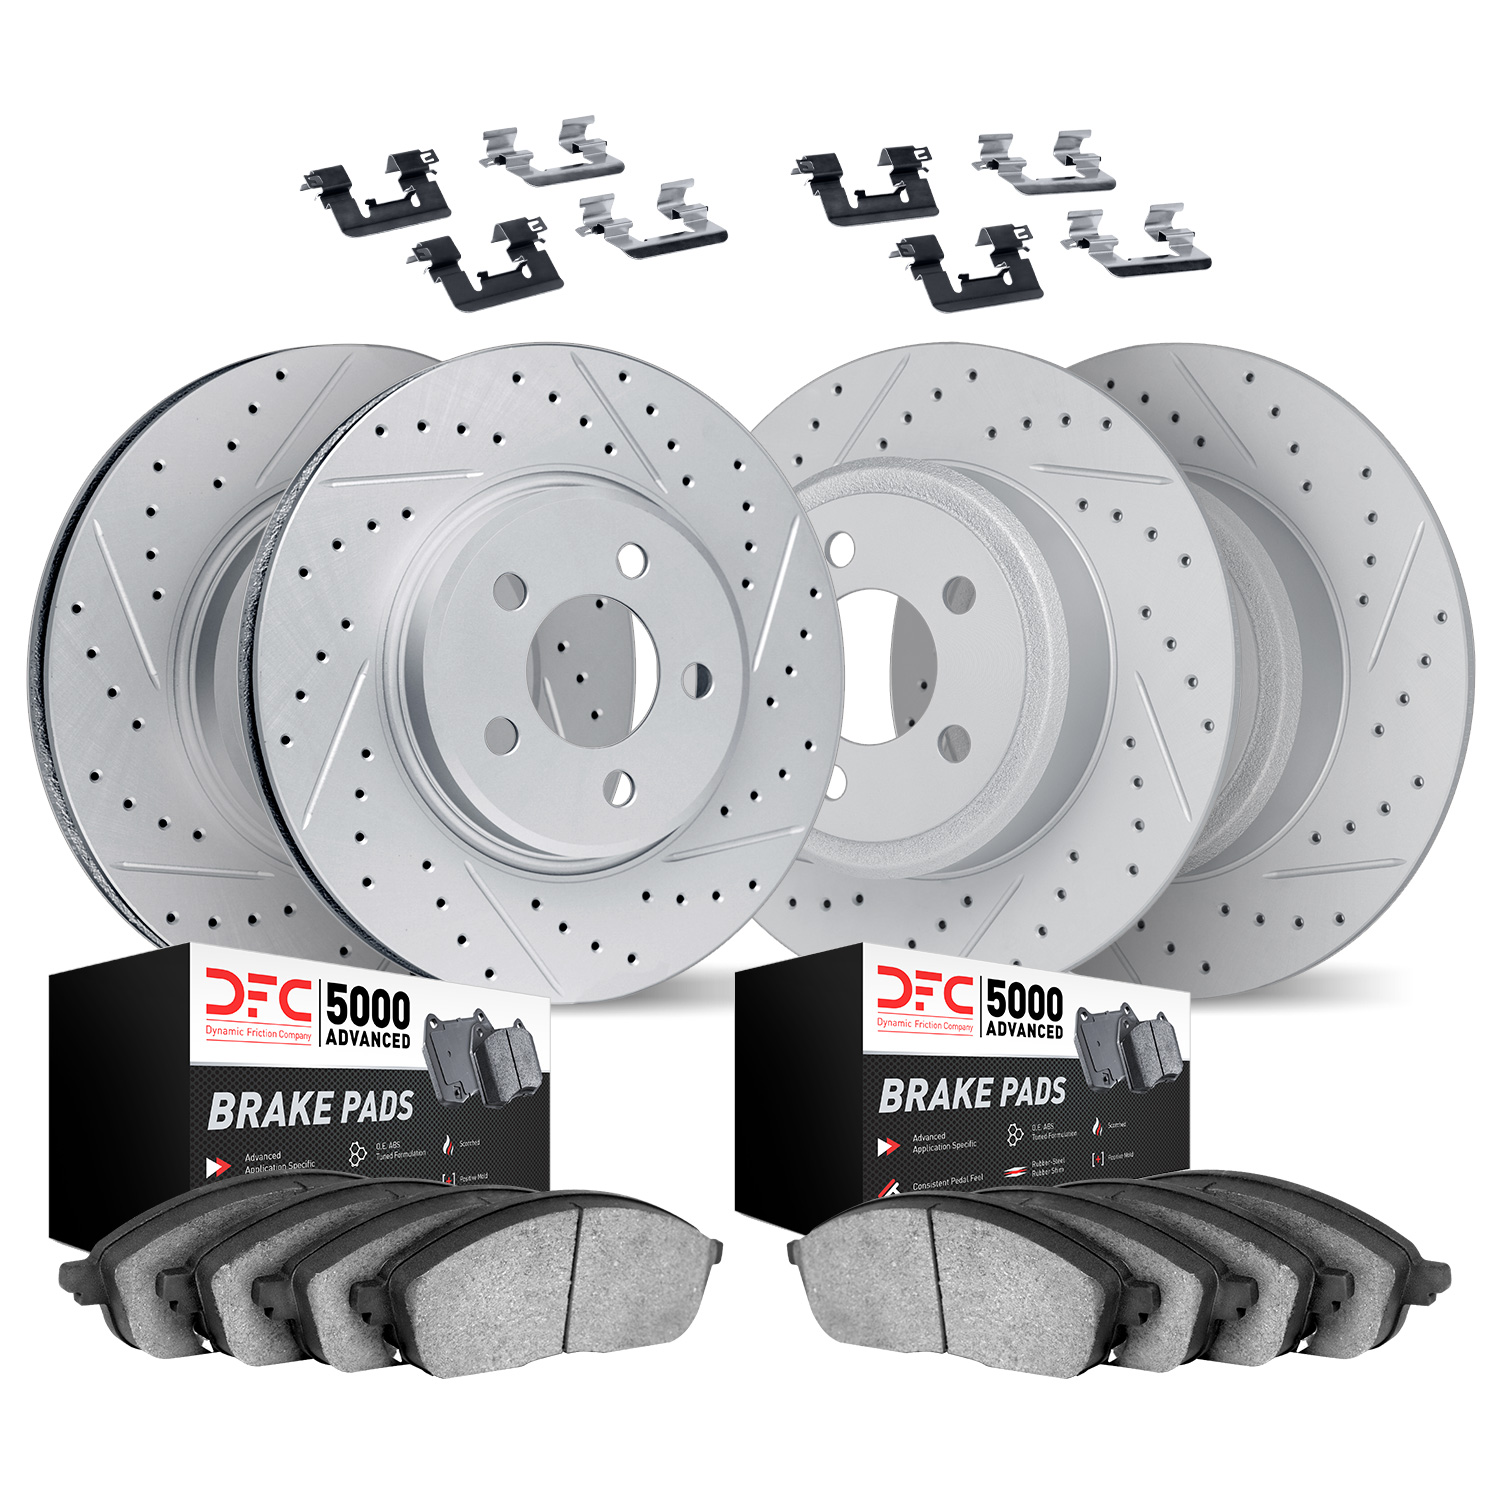 2514-65000 Geoperformance Drilled/Slotted Rotors w/5000 Advanced Brake Pads Kit & Hardware, 2003-2003 GM, Position: Front and Re